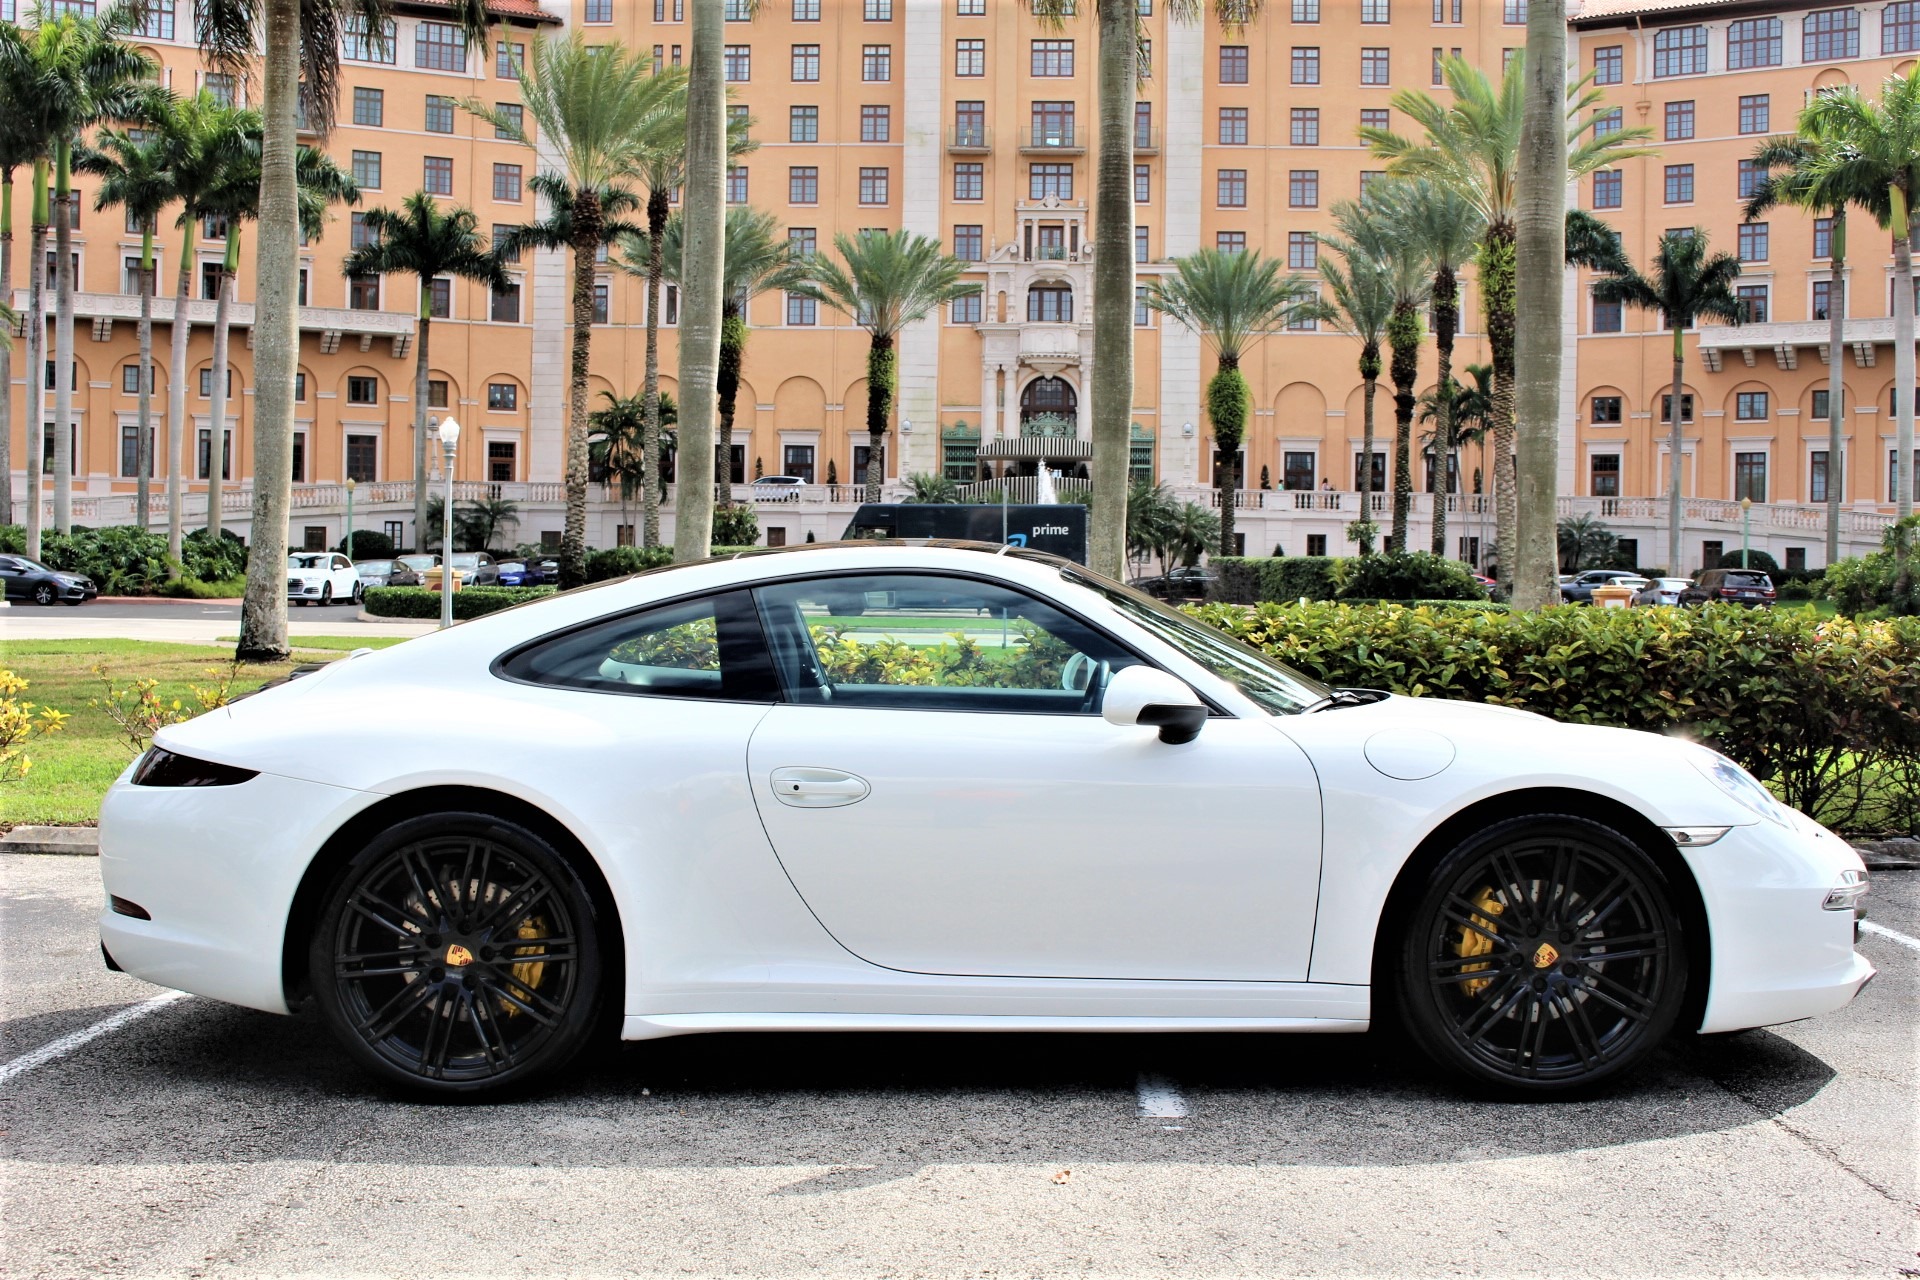 Used 2013 Porsche 911 Carrera 4 for sale Sold at The Gables Sports Cars in Miami FL 33146 1